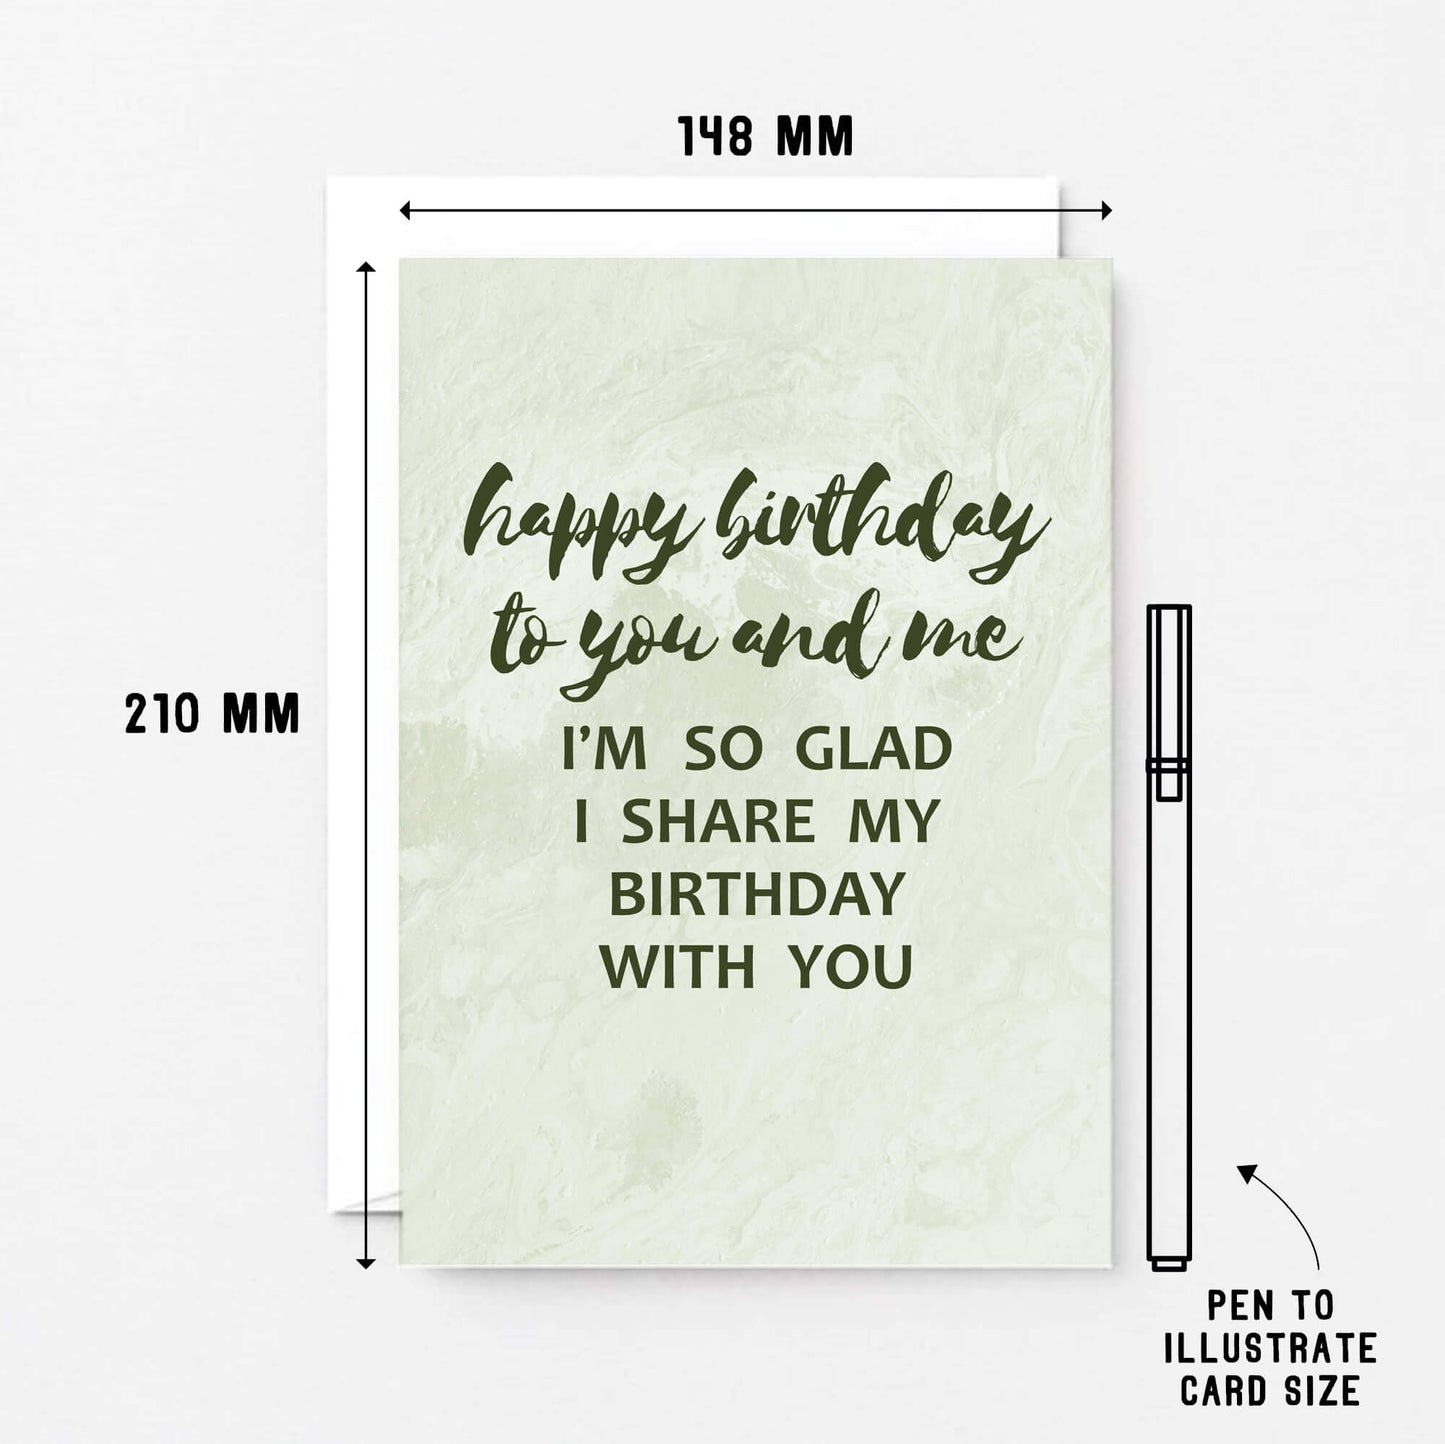 Birthday Card by SixElevenCreations. Reads Happy birthday to you and me. I'm so glad I share my birthday with you. Product Code SE3013A5